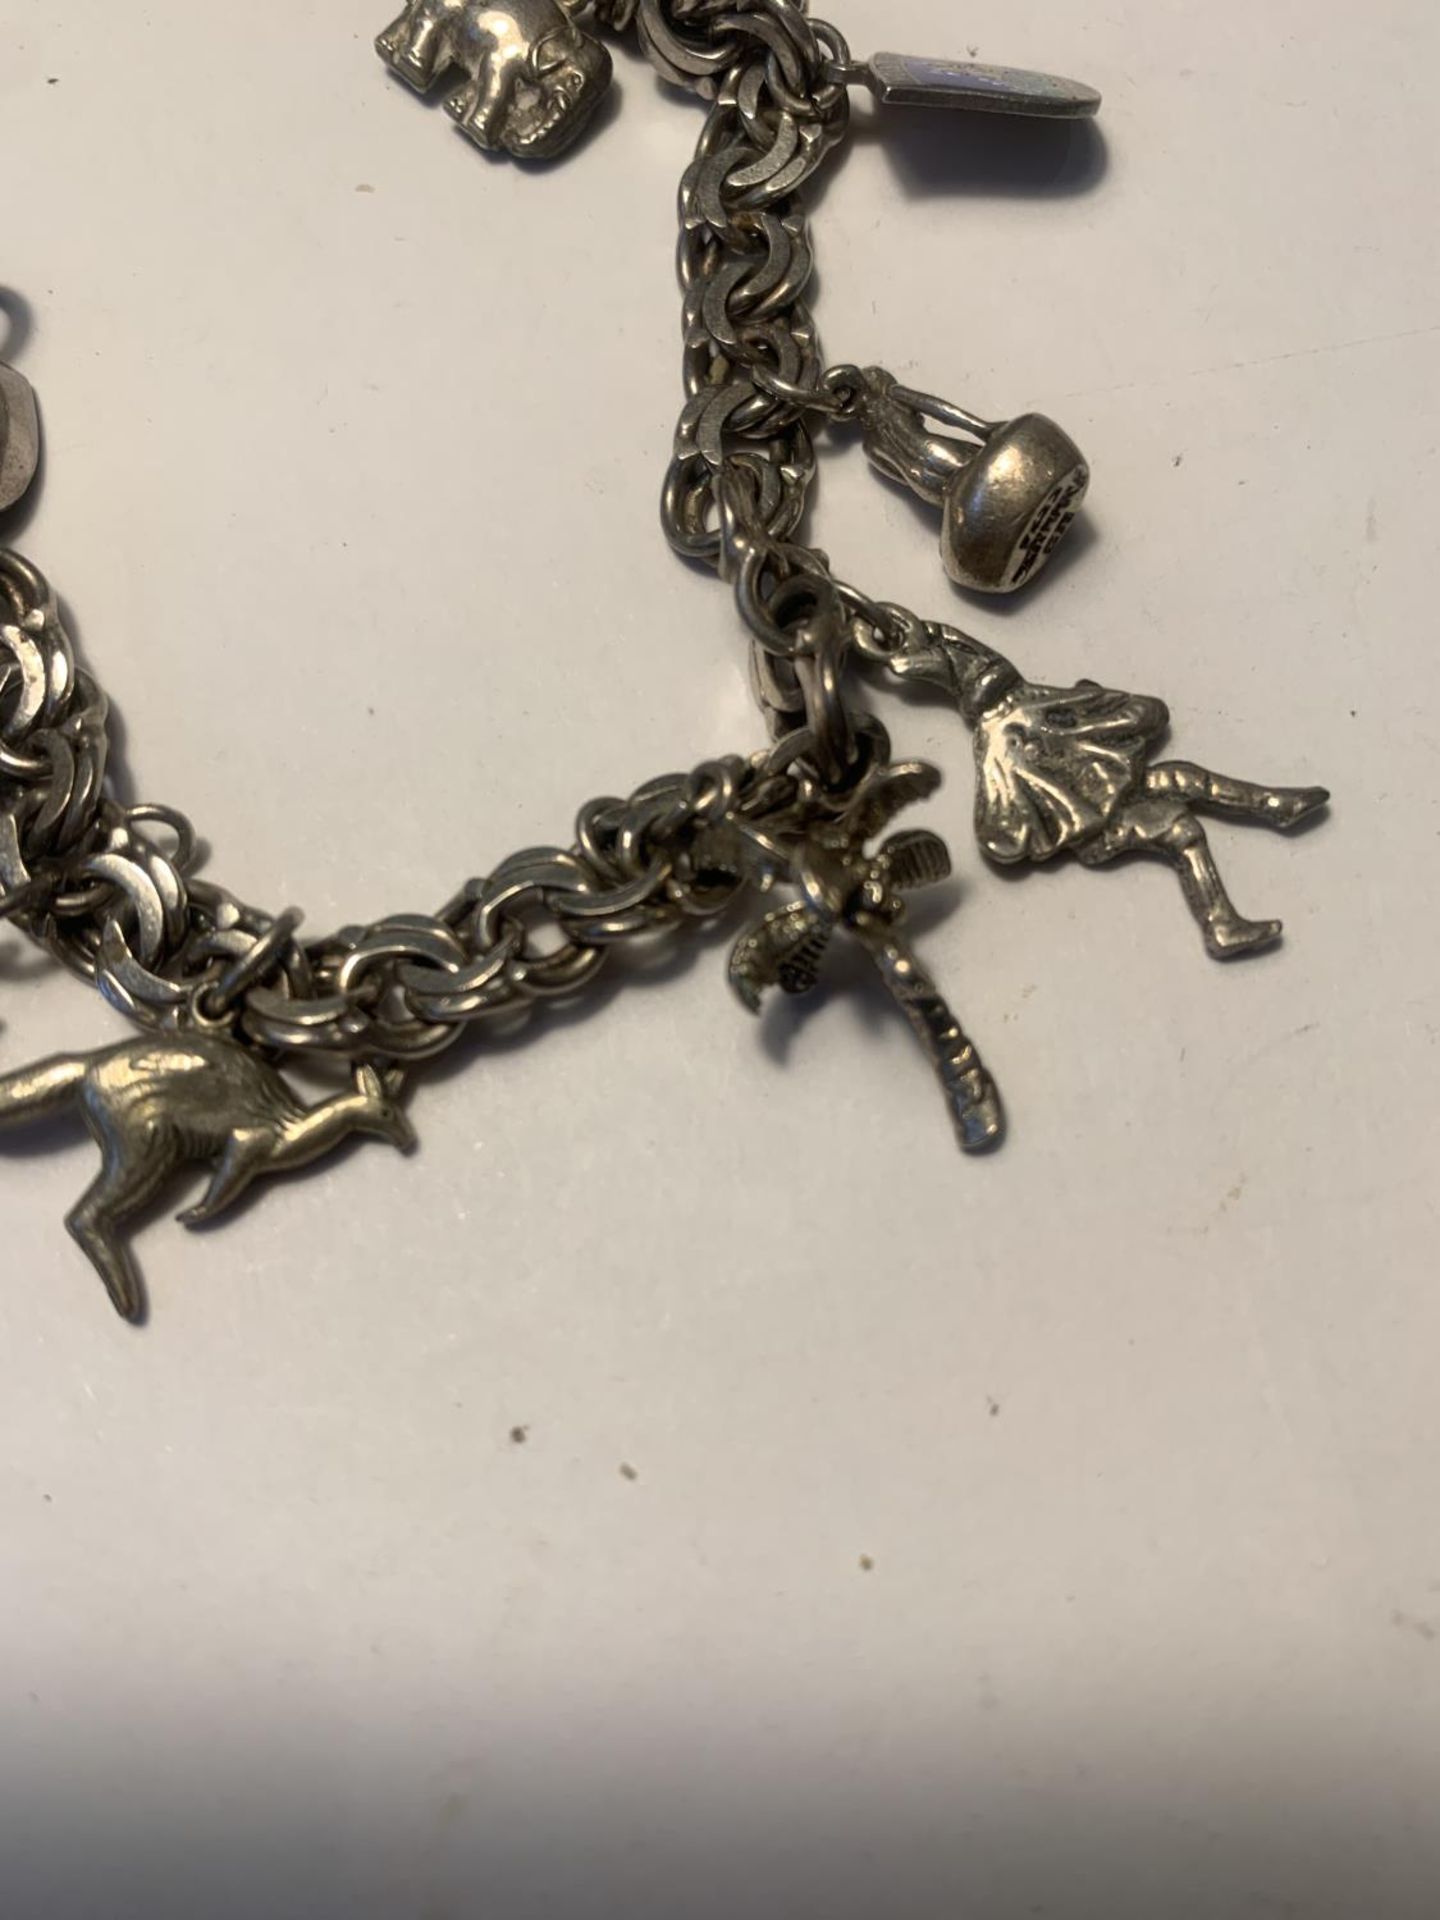 A SILVER CHARM BRACELET WITH TEN CHARMS - Image 3 of 4